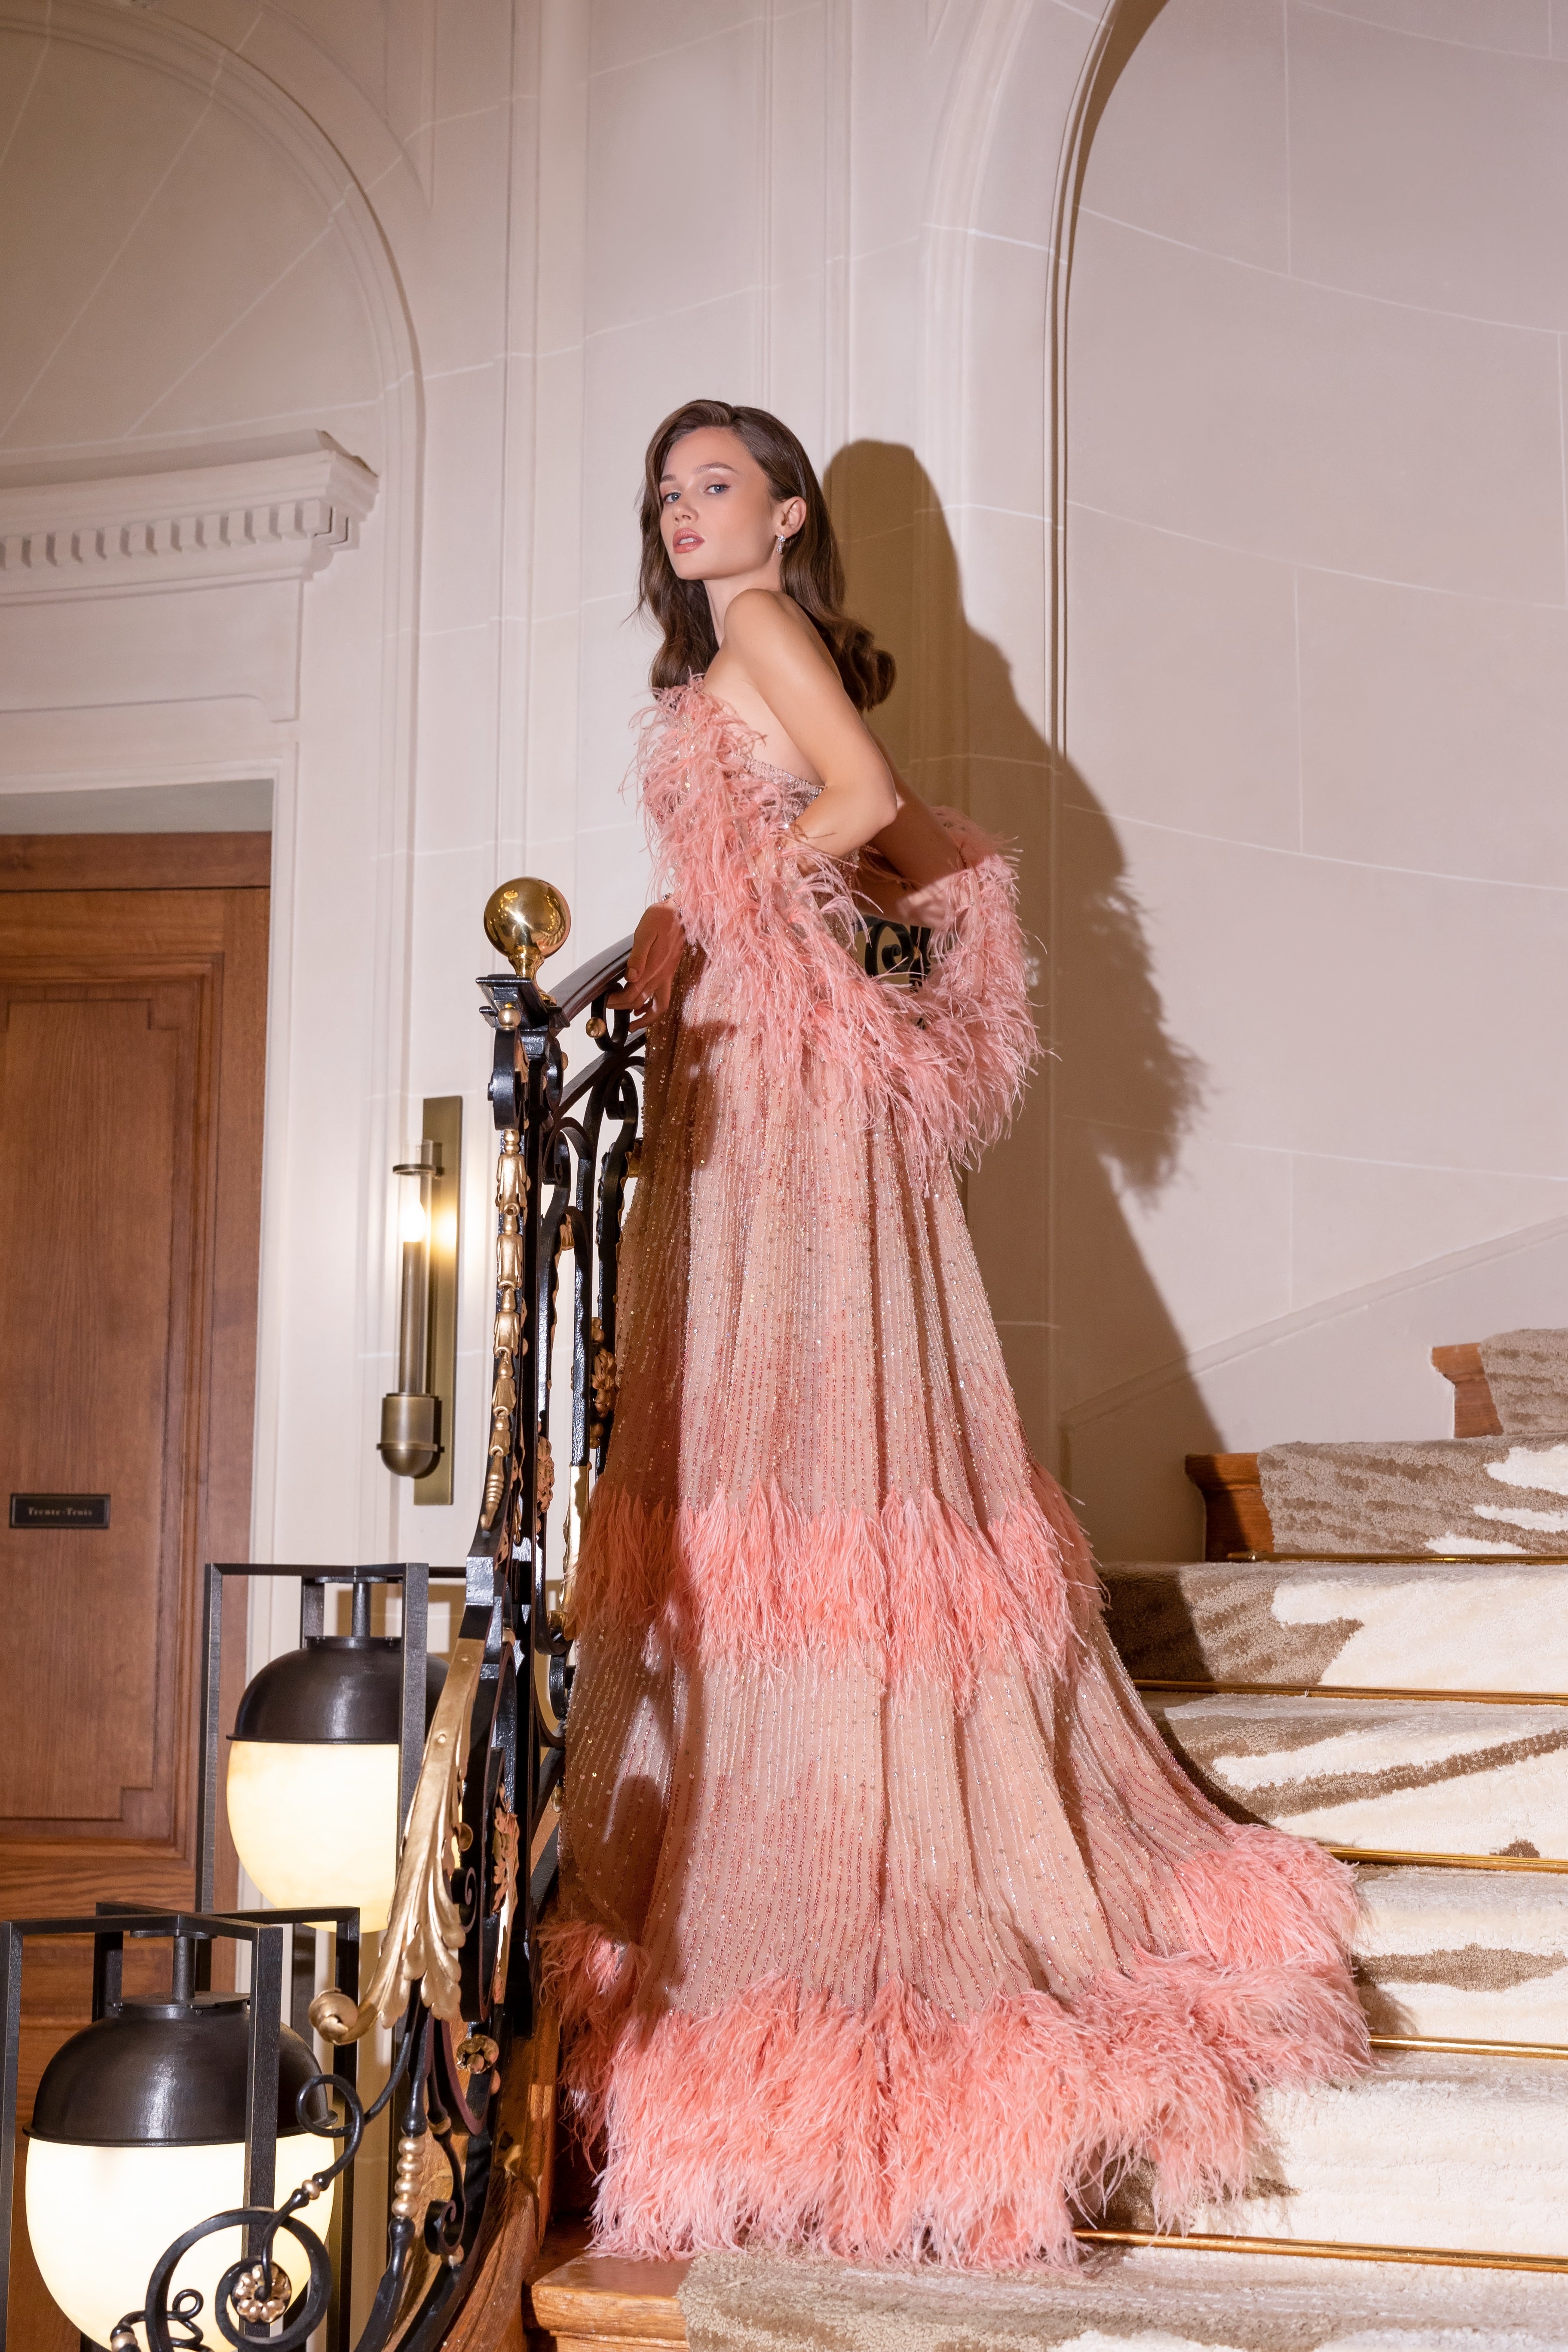 Feathered evening dress with a stunning design inspired by flowers and nature